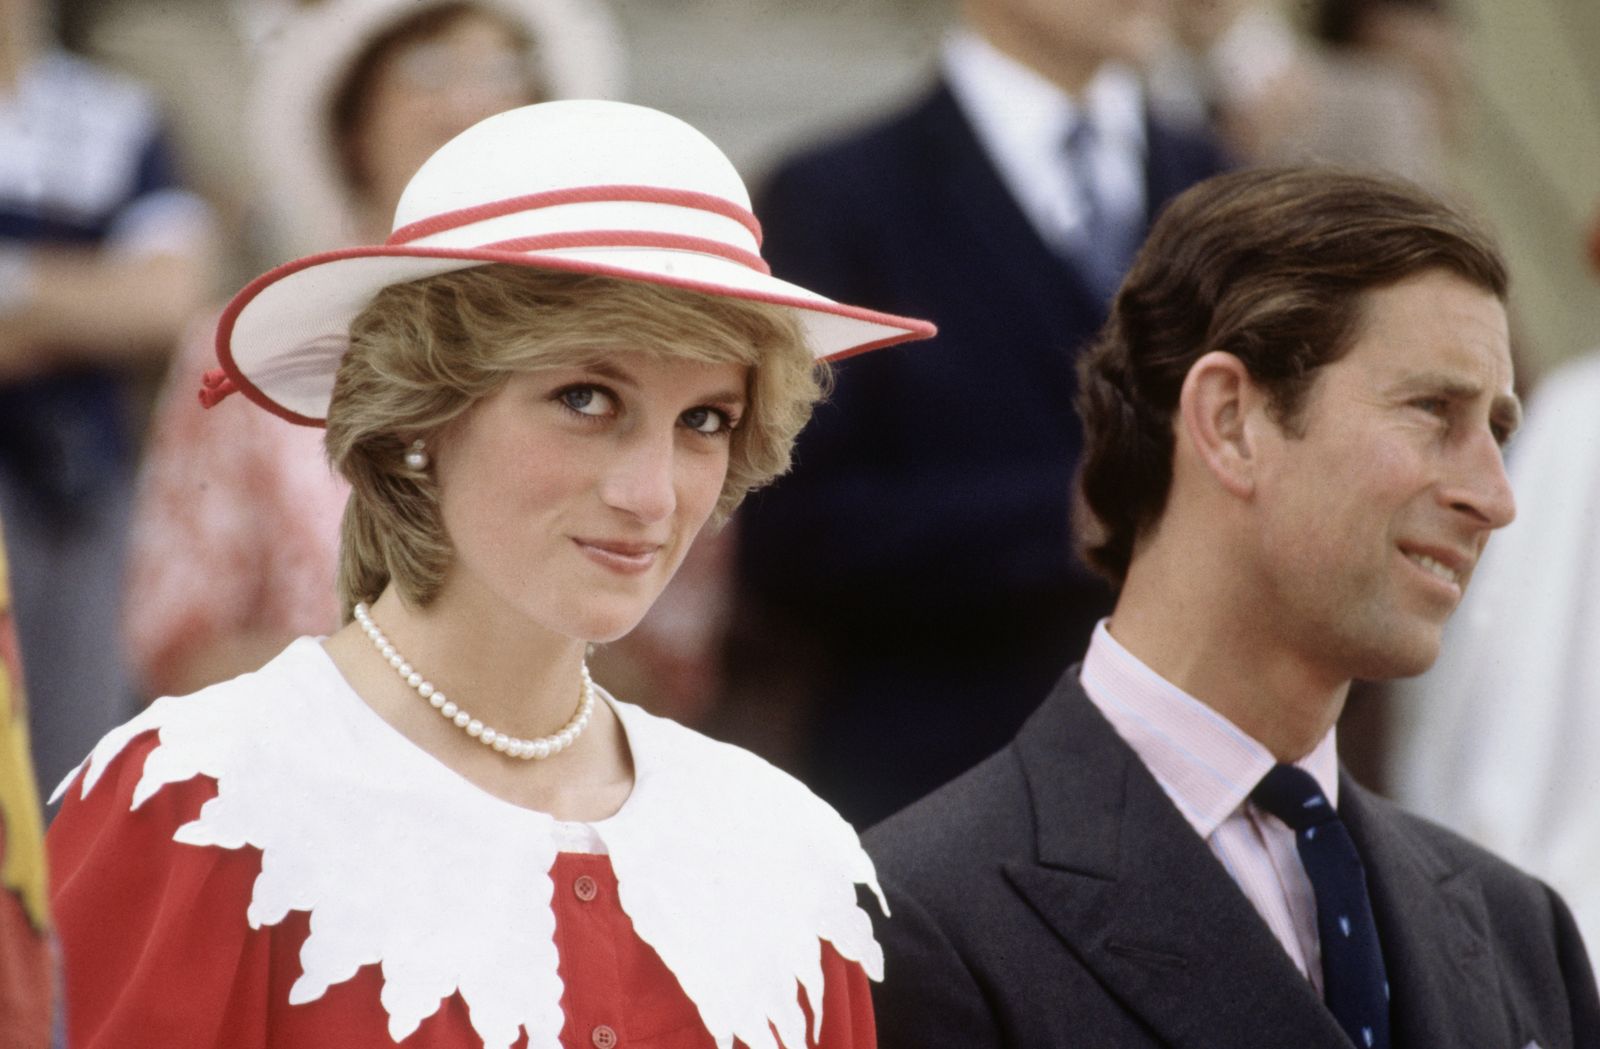 Princess Diana and Prince Charles at the Royal Tour of Canada on June 29, 1983 in Edmonton, Alberta, Canada | Photo: Getty Images